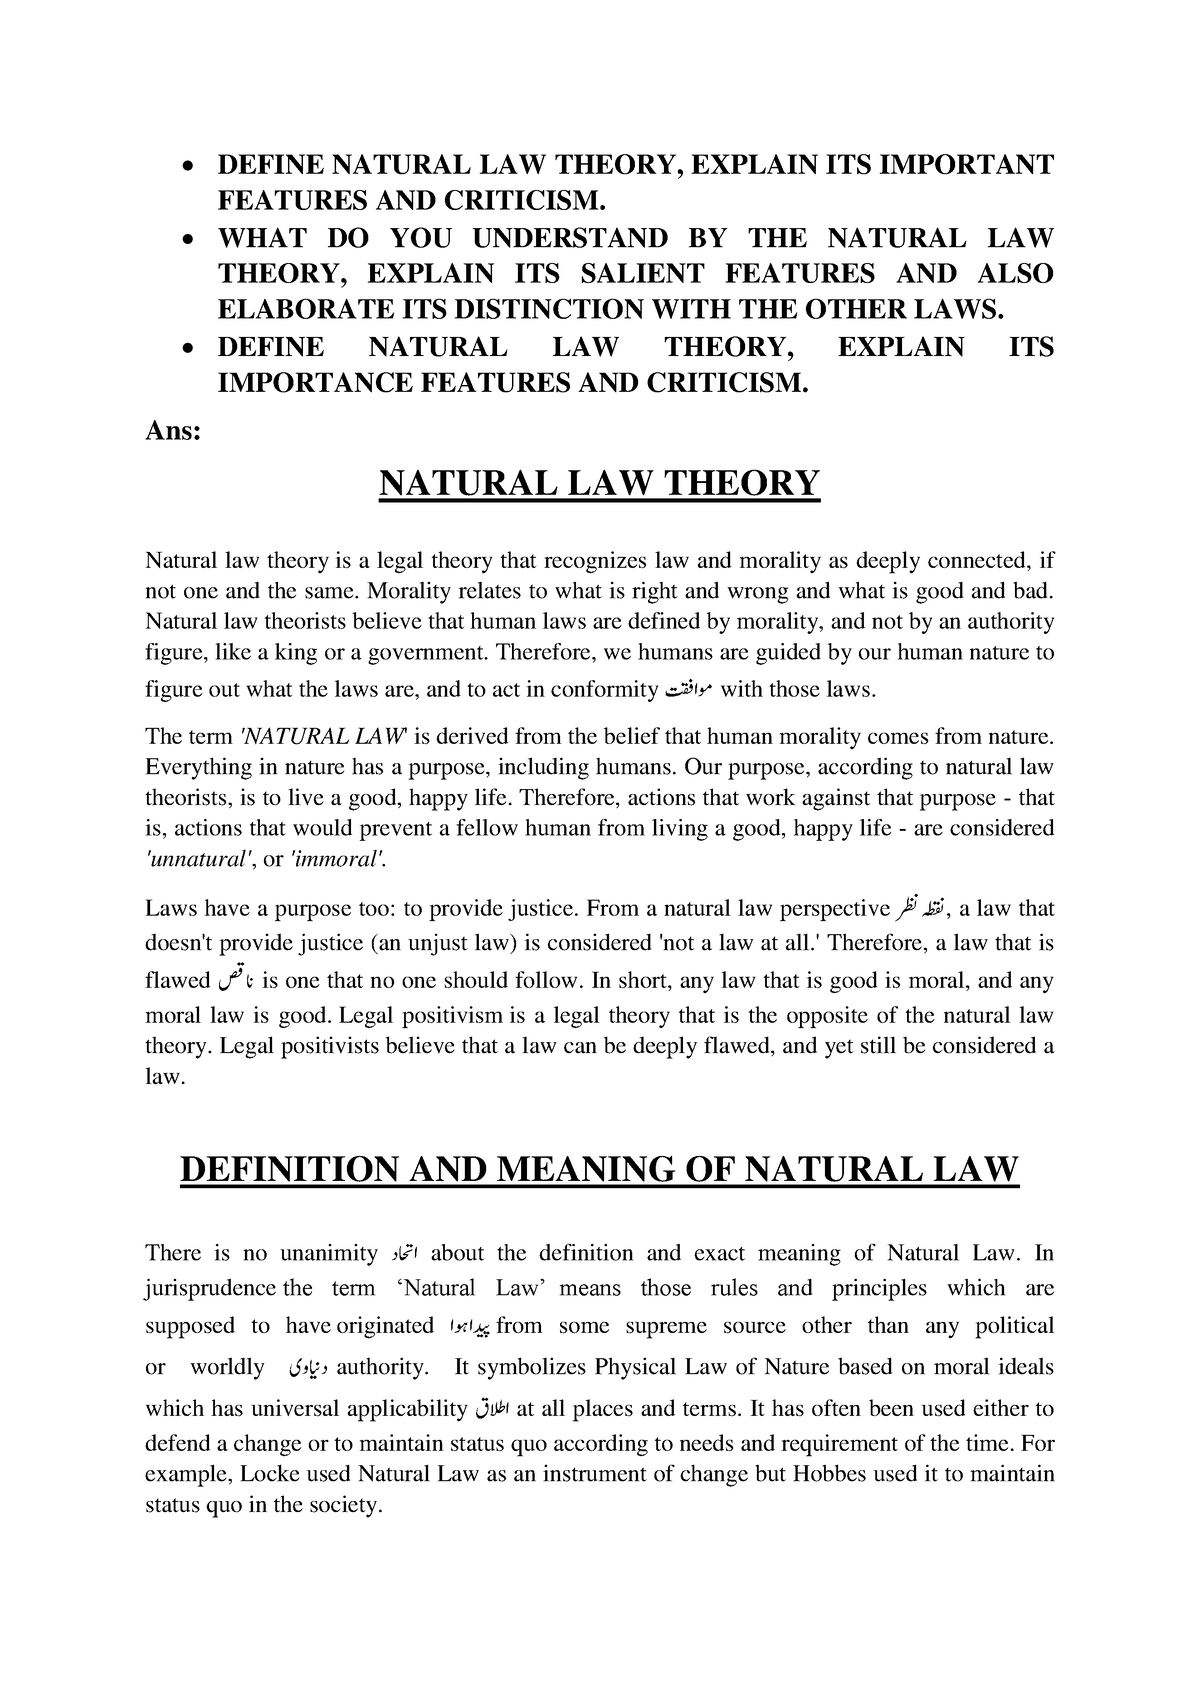 natural law theory essay